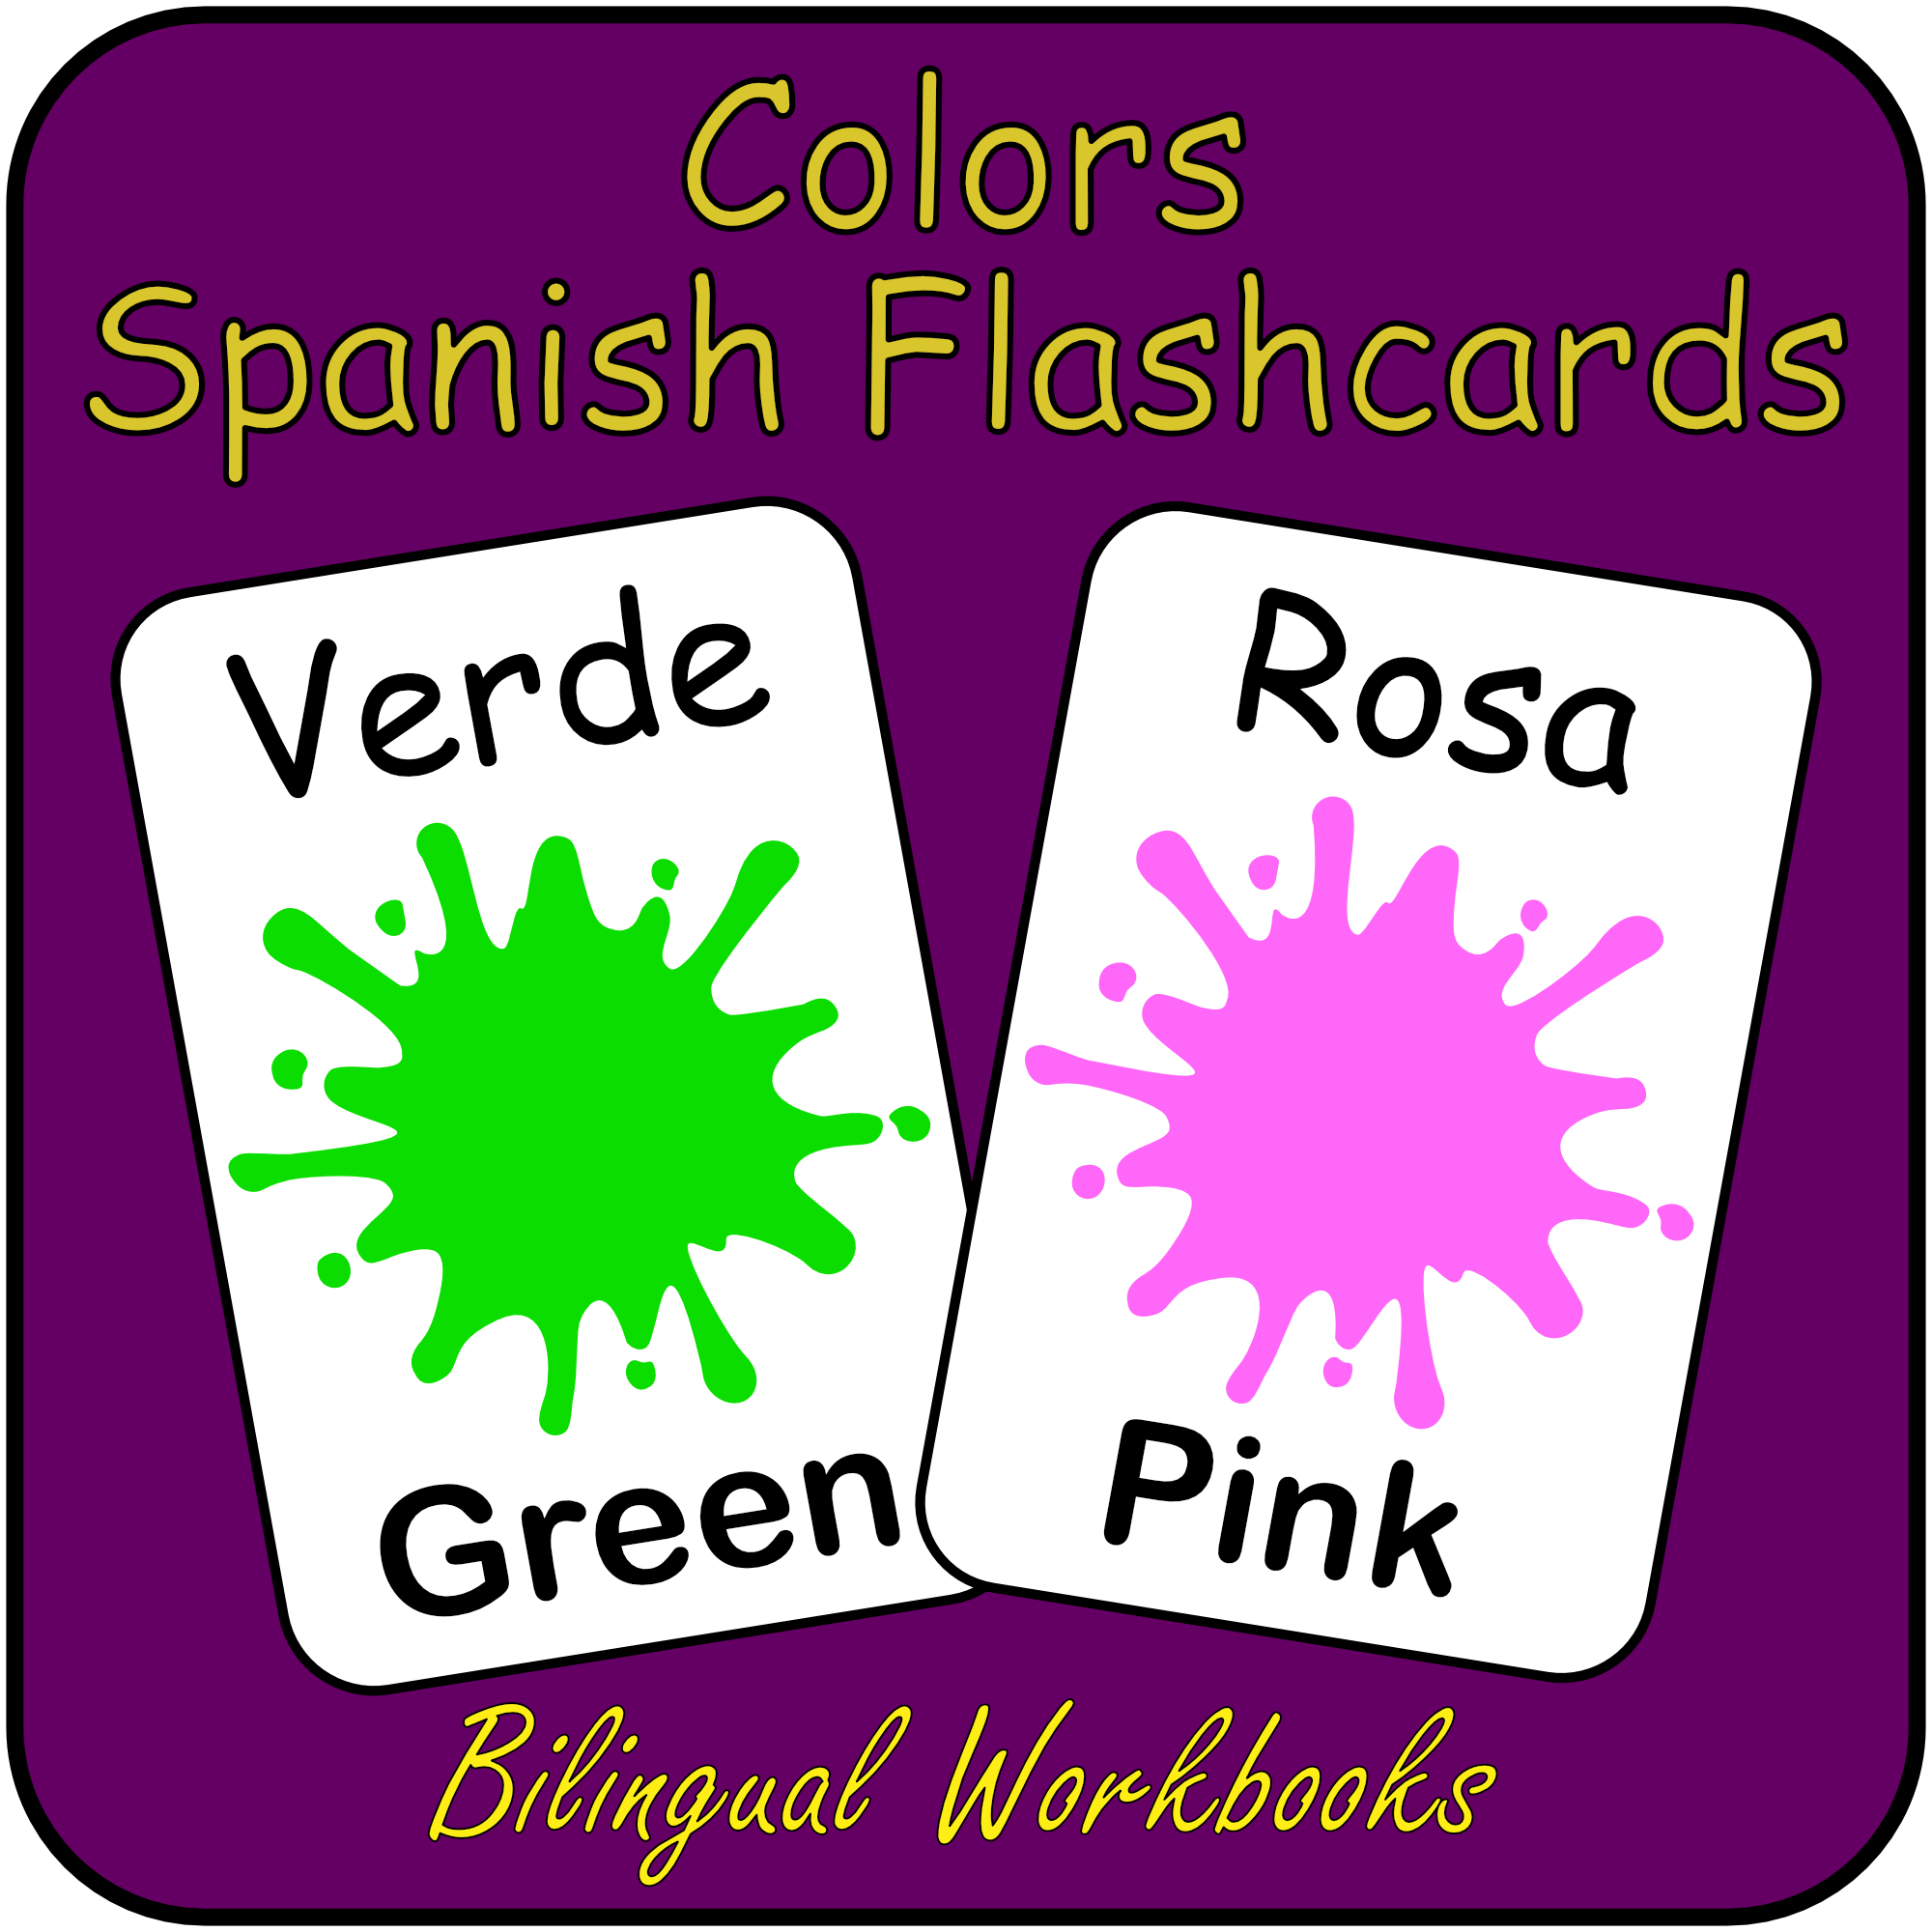 COLORS - Spanish Flash Cards - Vocabulary Study flashcards with English and Spanish - Learn or Teach Spanish